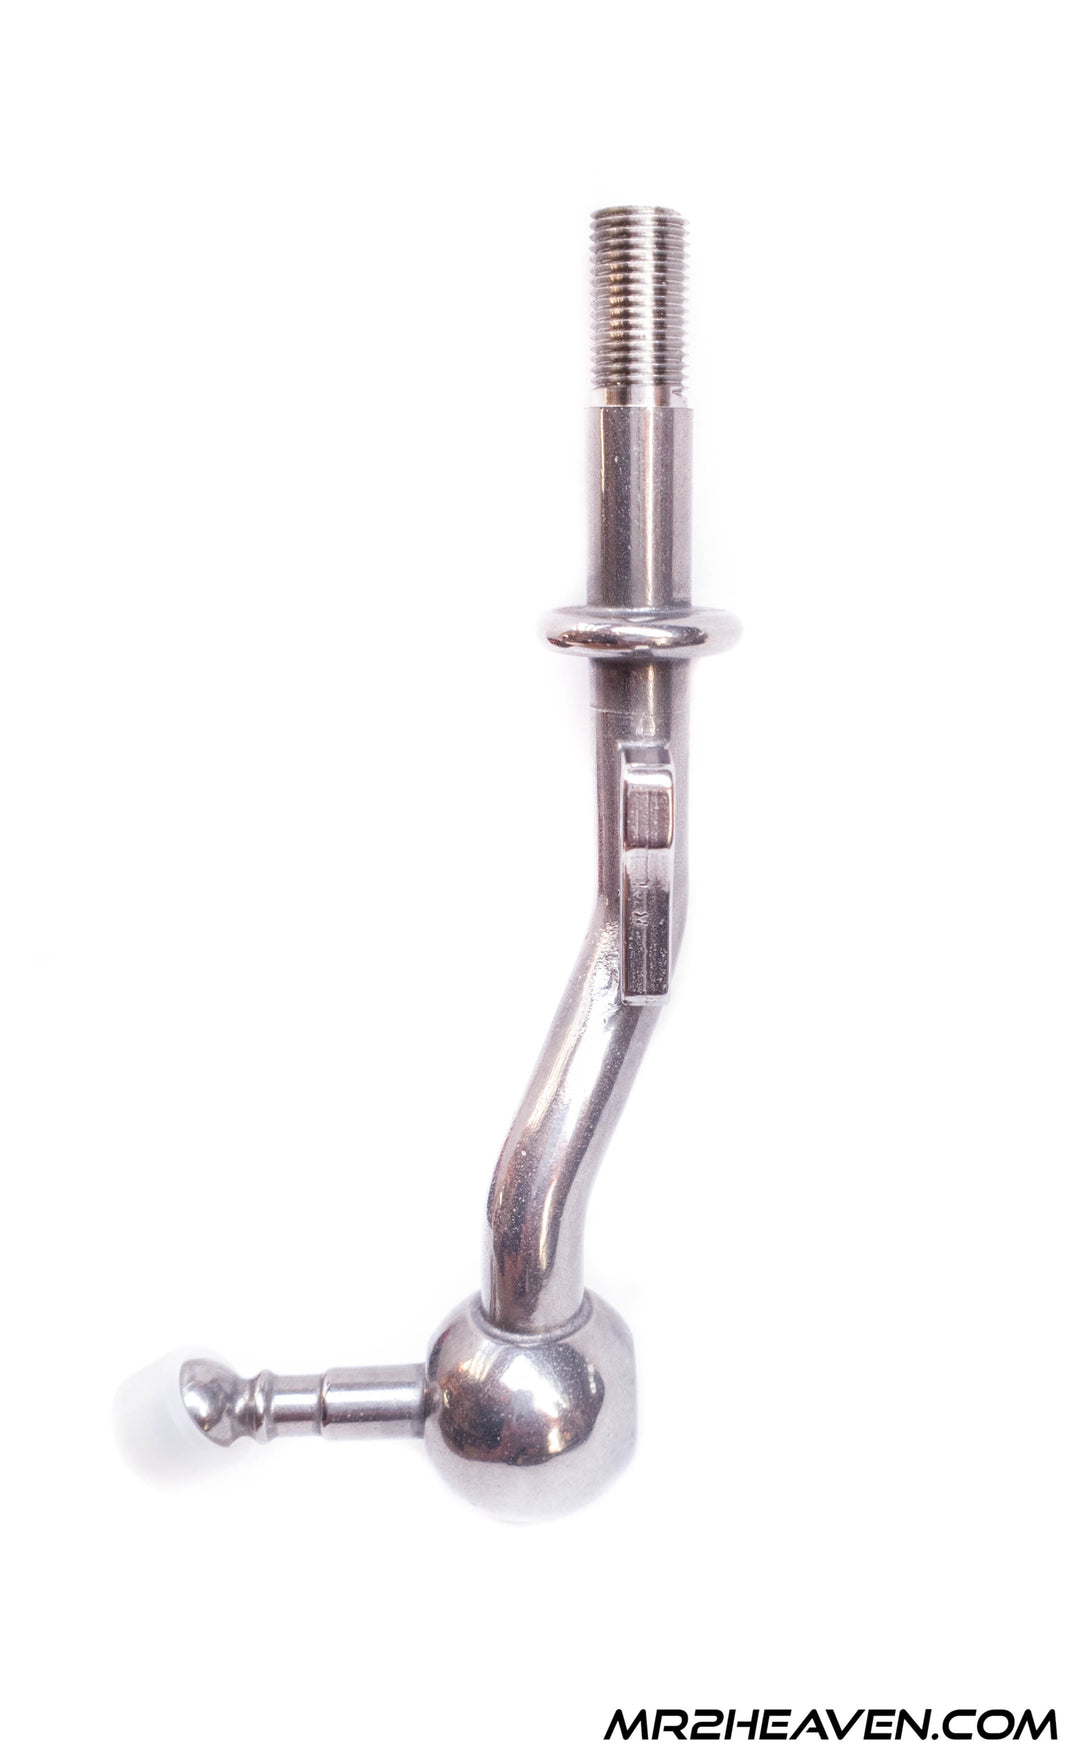 MR2Heaven ULTIMATE HYBRID ADJUSTABLE Short Shifter Kit (Our High Angle, Cs, TRD, Our Medium Angle, OE 93+) - ALL IN ONE